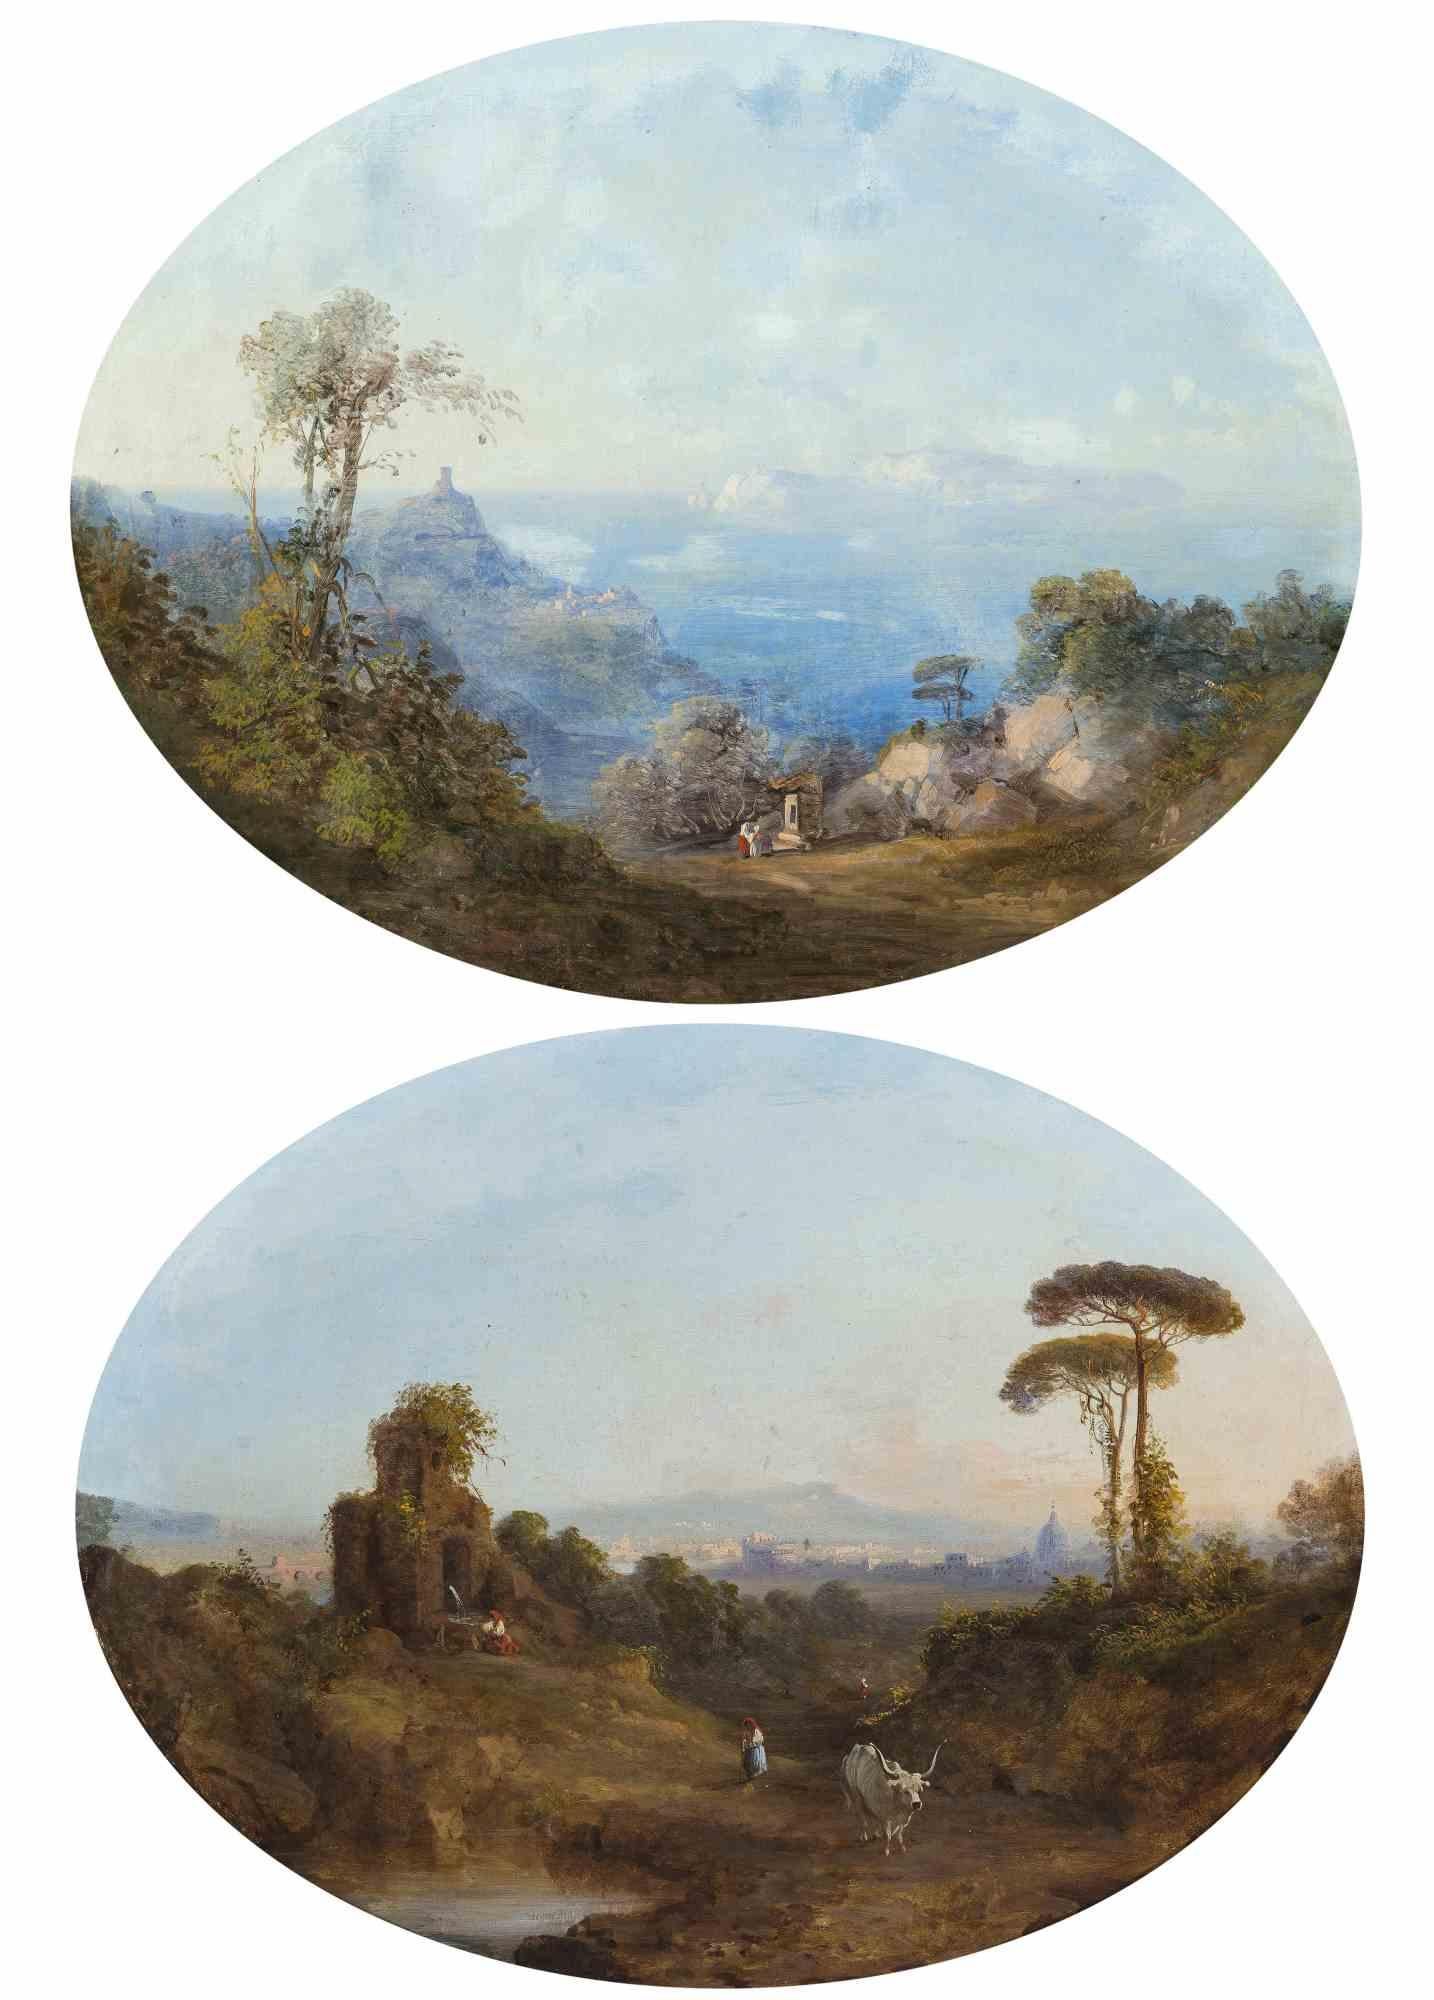 Unknown Figurative Painting - Pair of Landscapes with Views of Ancient Rome - Oil on Canvas - Mid 19th century